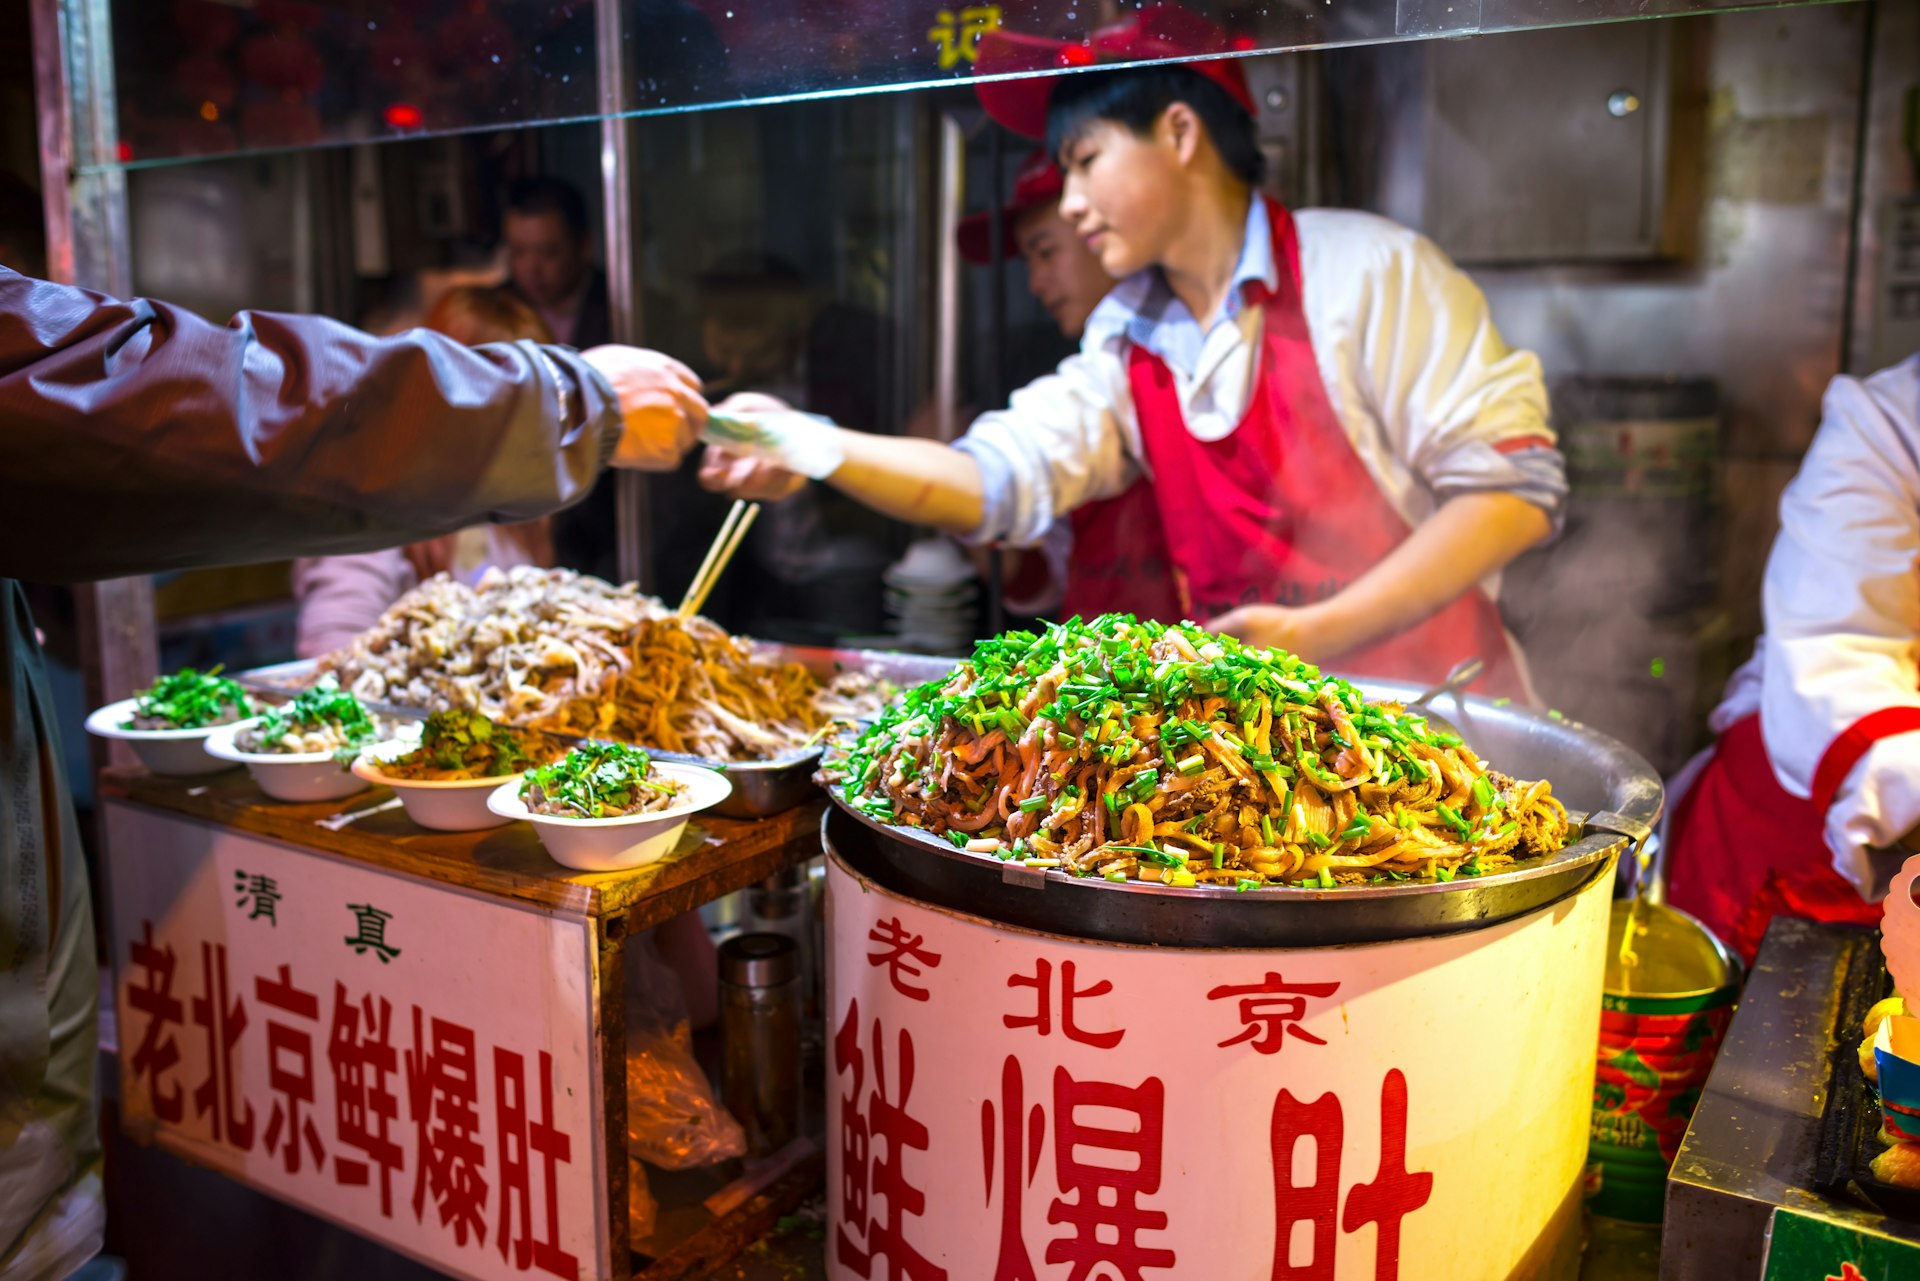 A chef selling pork tripe from a snack food stall on the street.